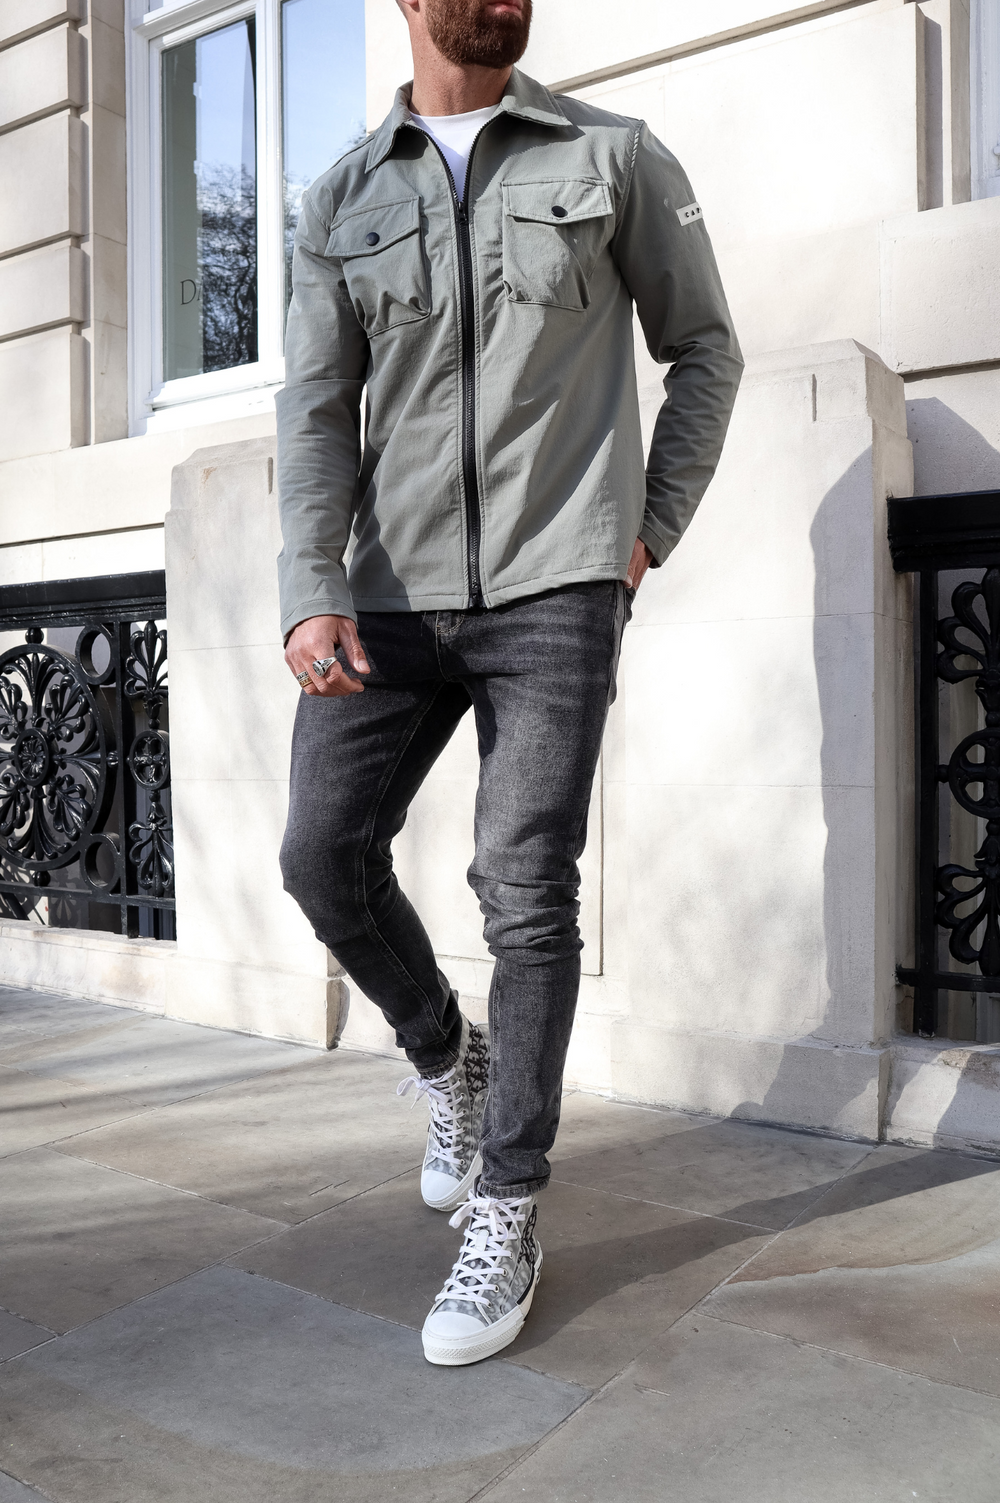 Capo BUTTON Jacket - Olive – CAPO | Meaning Behind The Brand